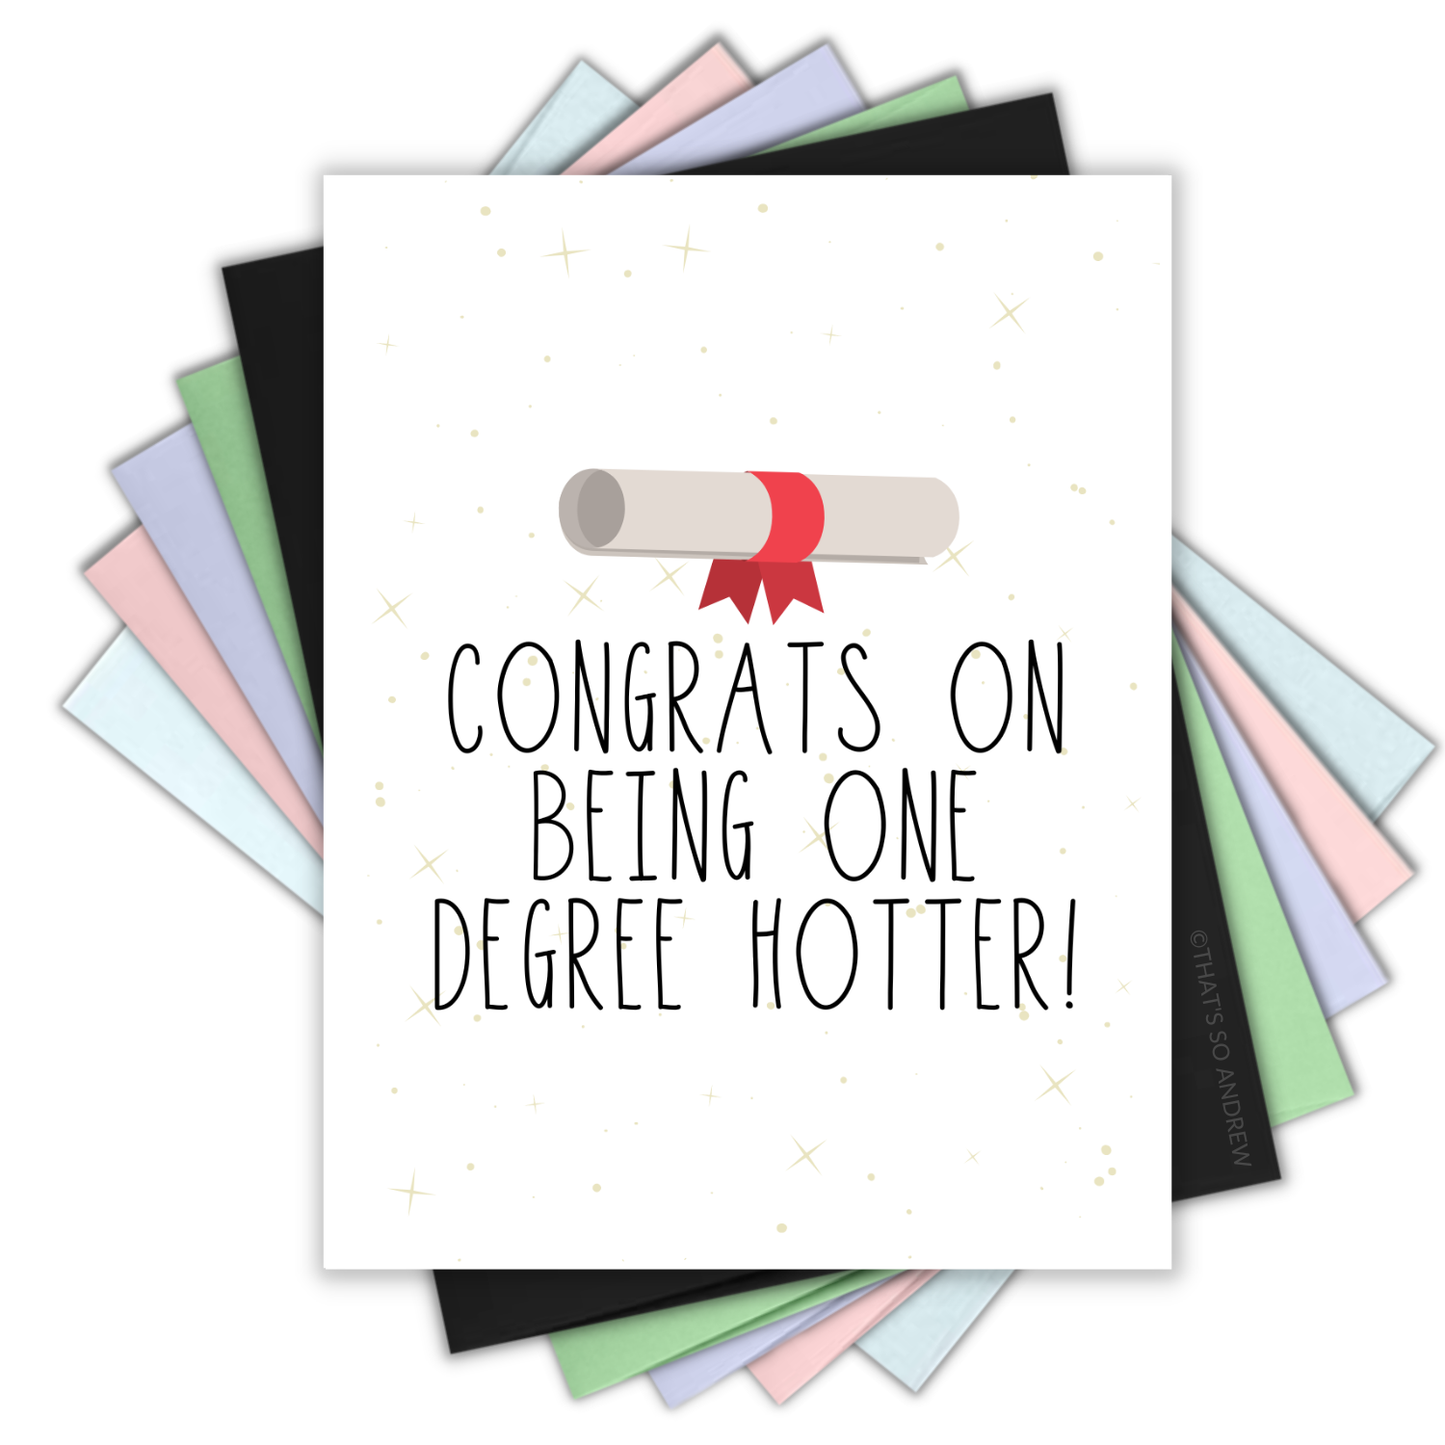 One Degree Hotter | Funny Graduation Greeting Card